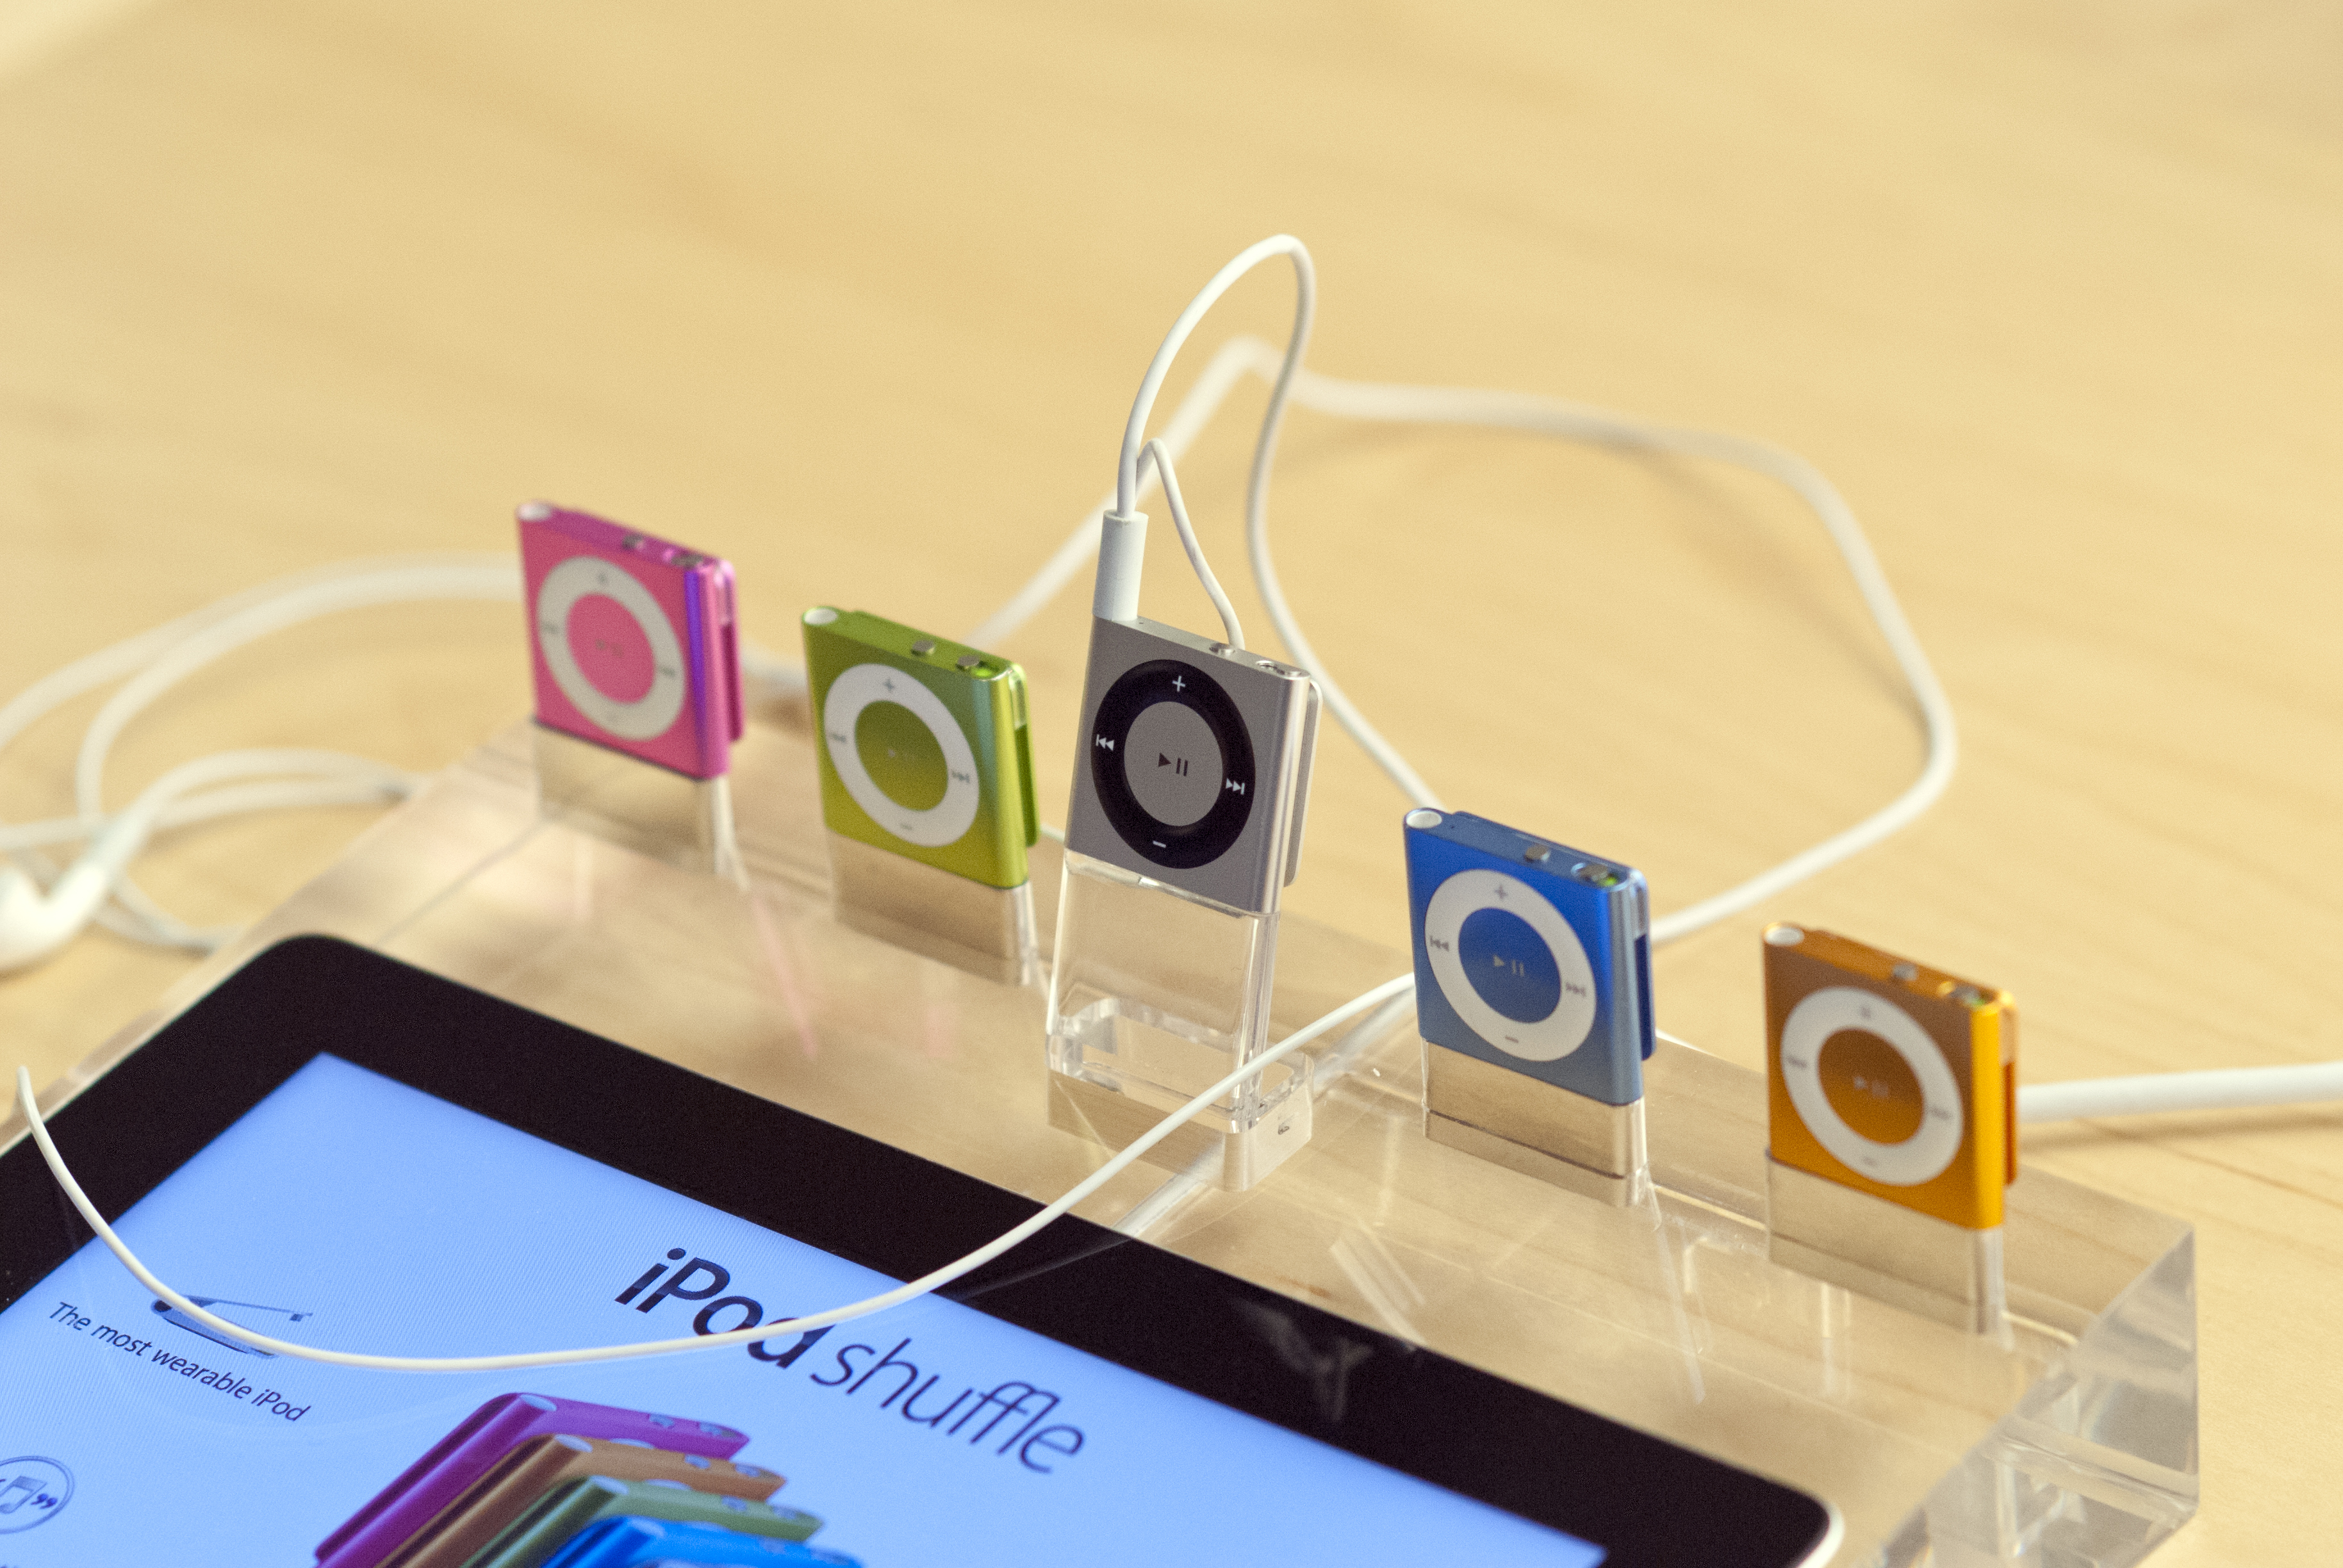 2010 iPod Shuffle 4th Generation Unveiled - The Buttons Are Back